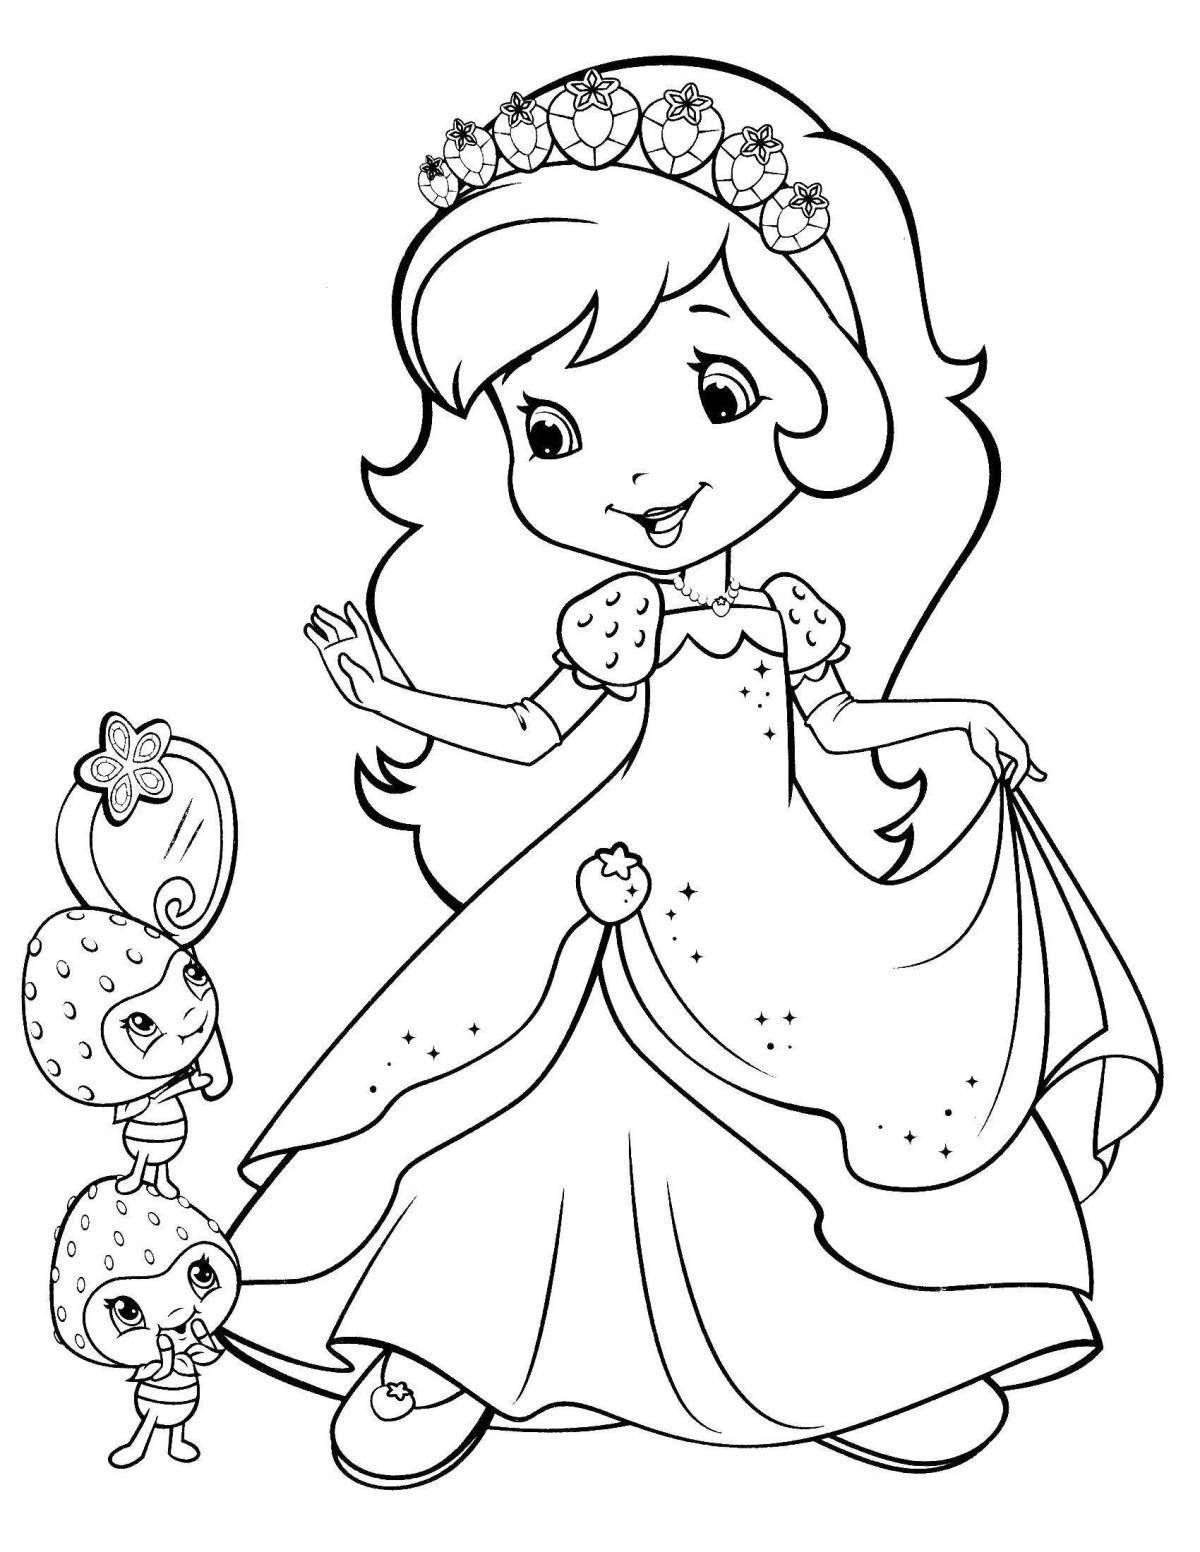 Shining coloring book for girls princesses 5-6 years old